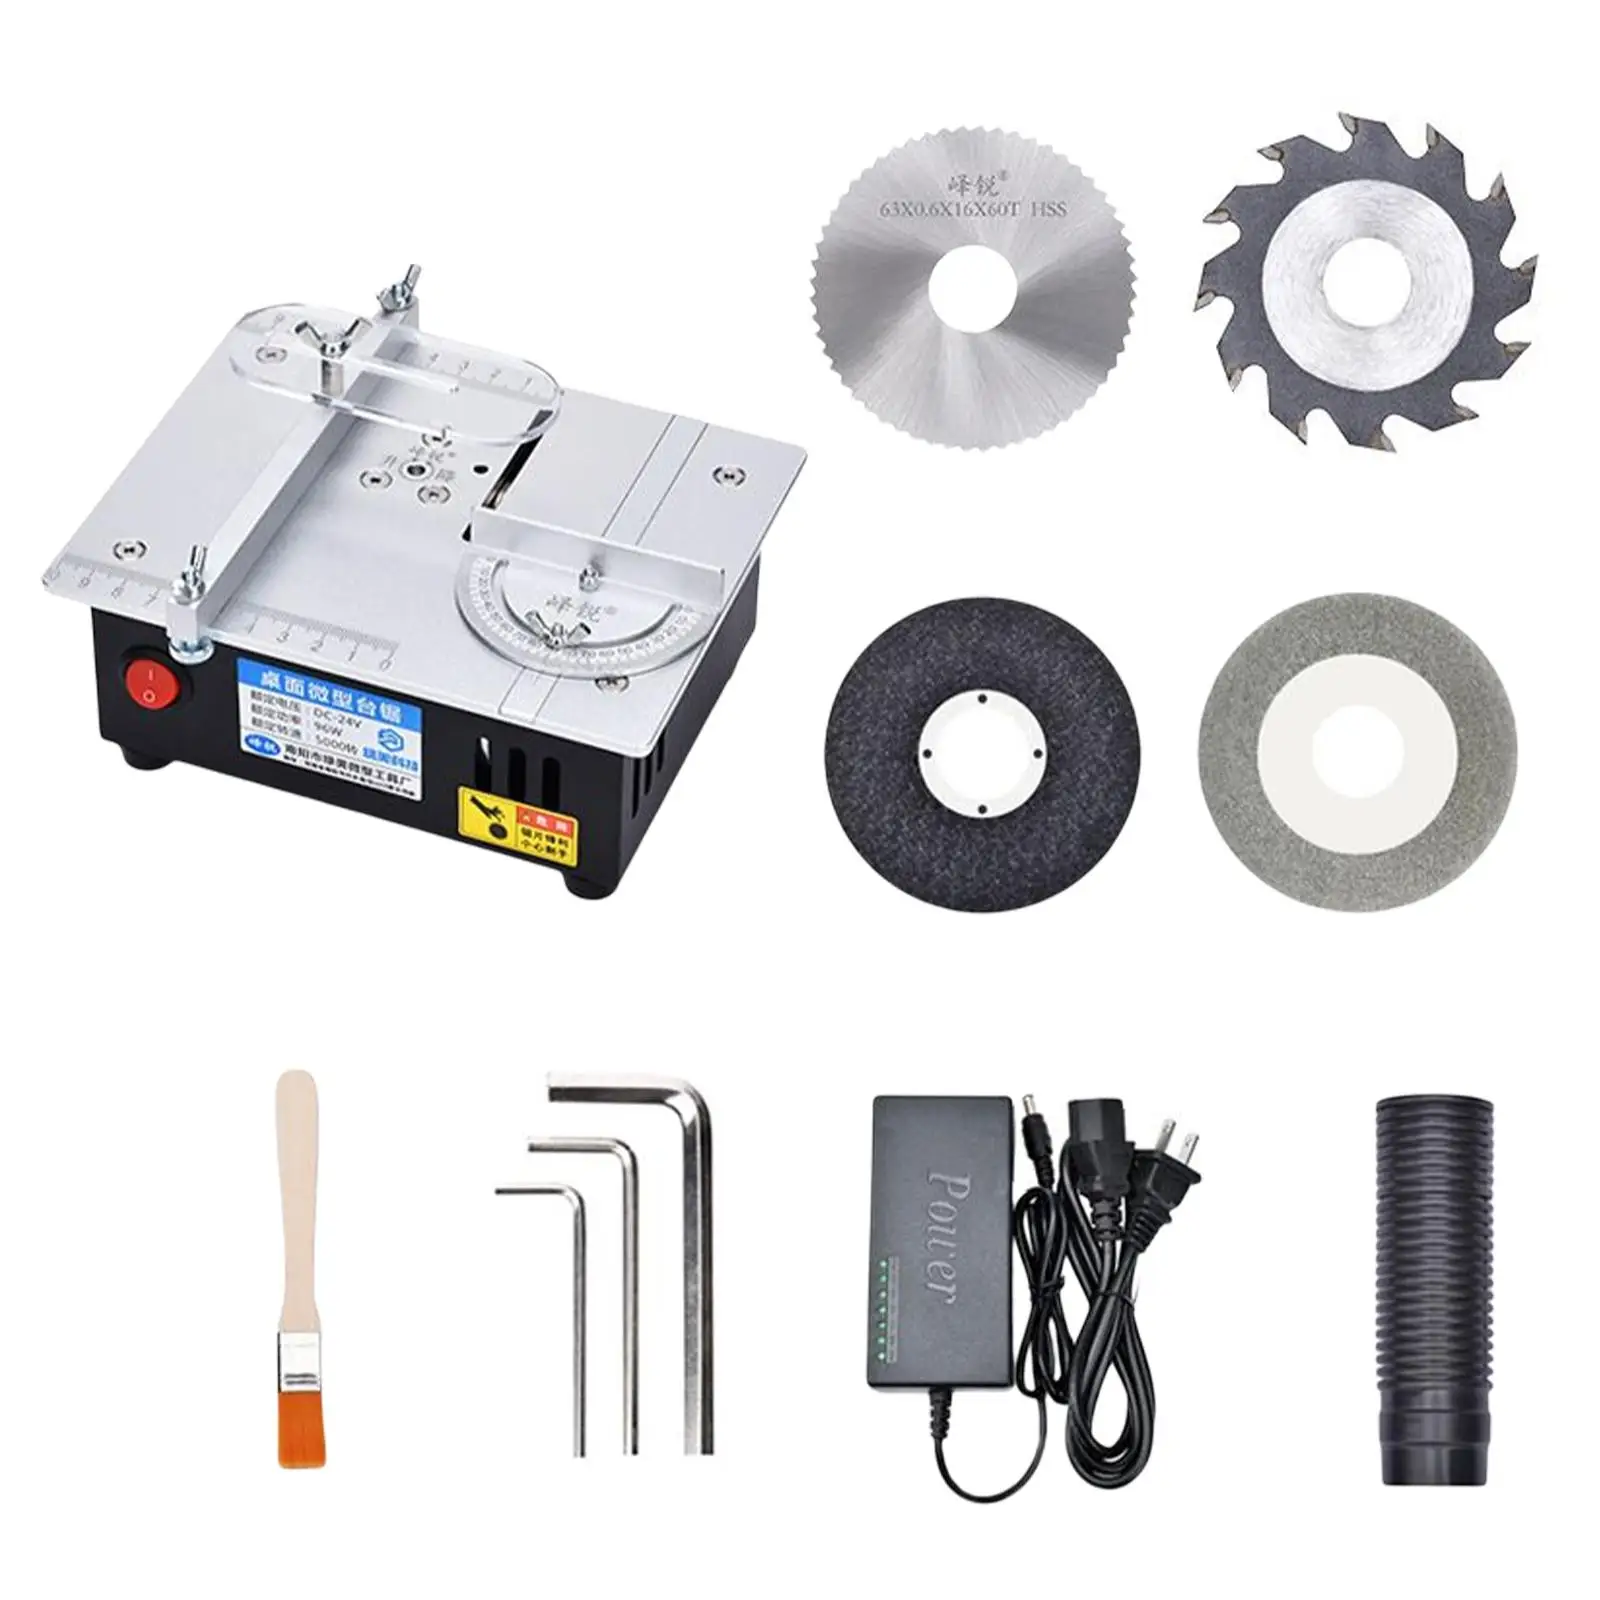 Mini Table Insert Plate Precision Portable Cutting Machine Trimmer Tools for Woodworking